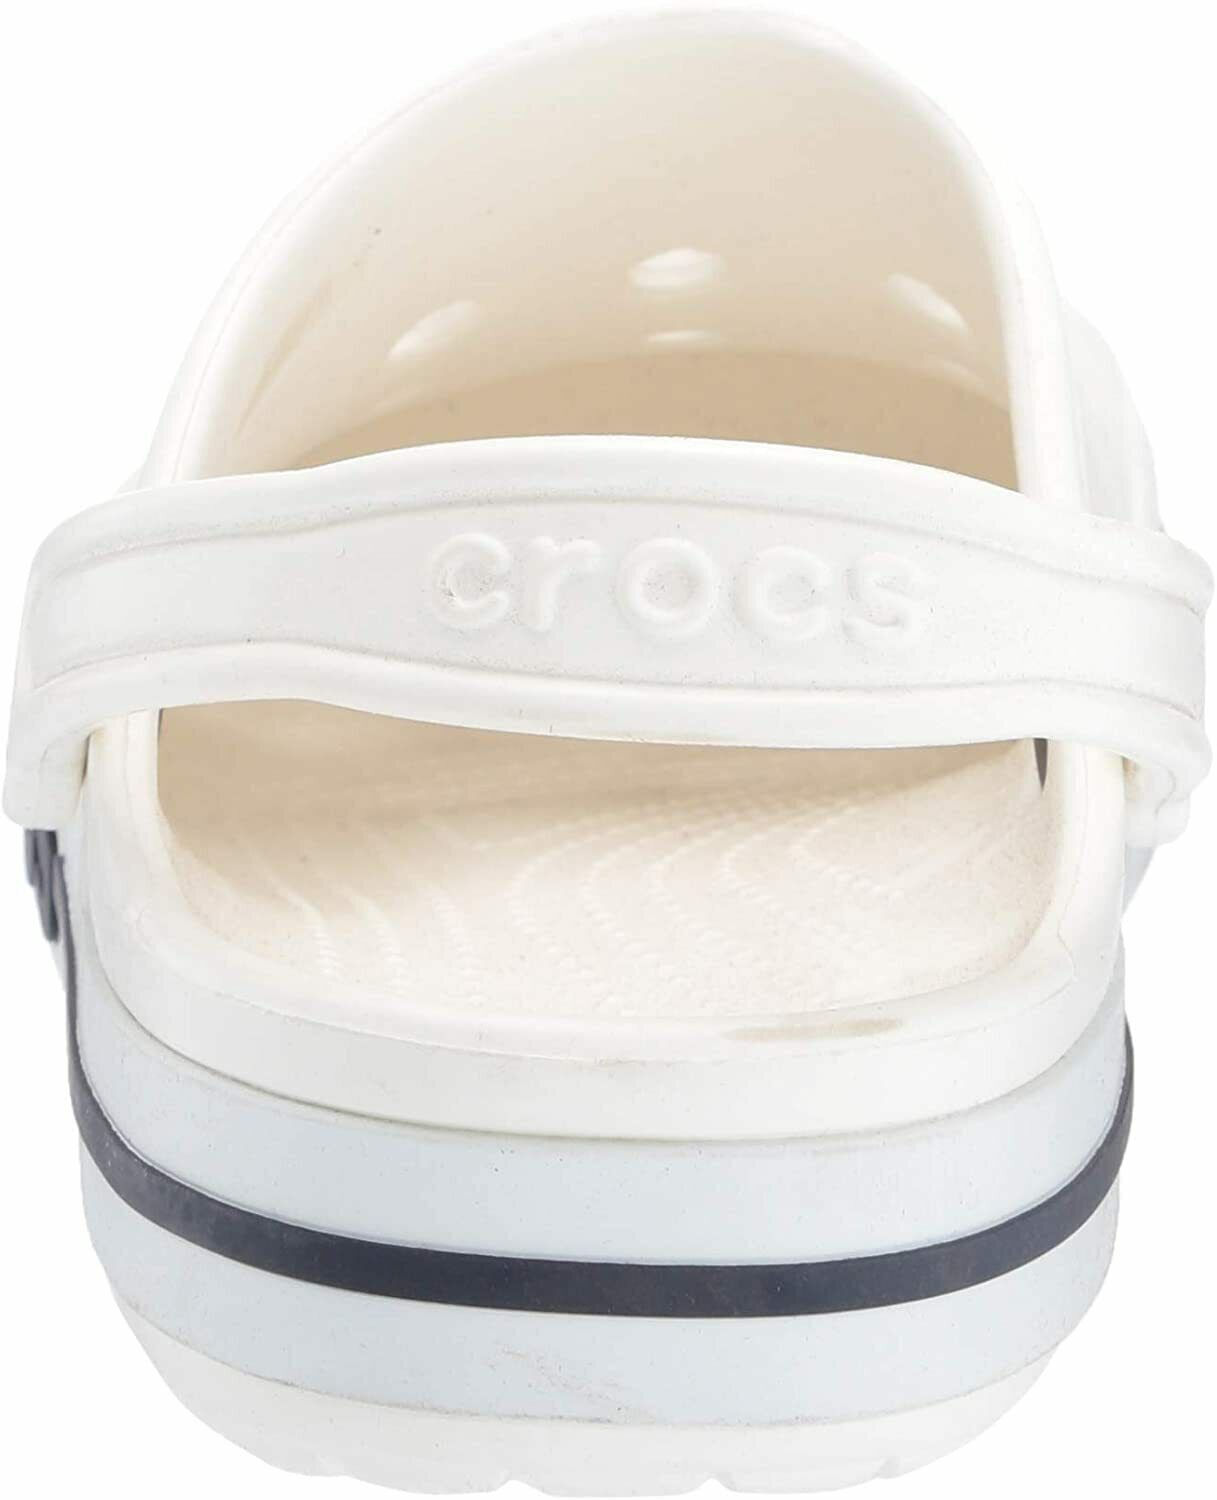 Crocs shoes got a fashion makeover :: Heels, sandals and wedge designs  introduced